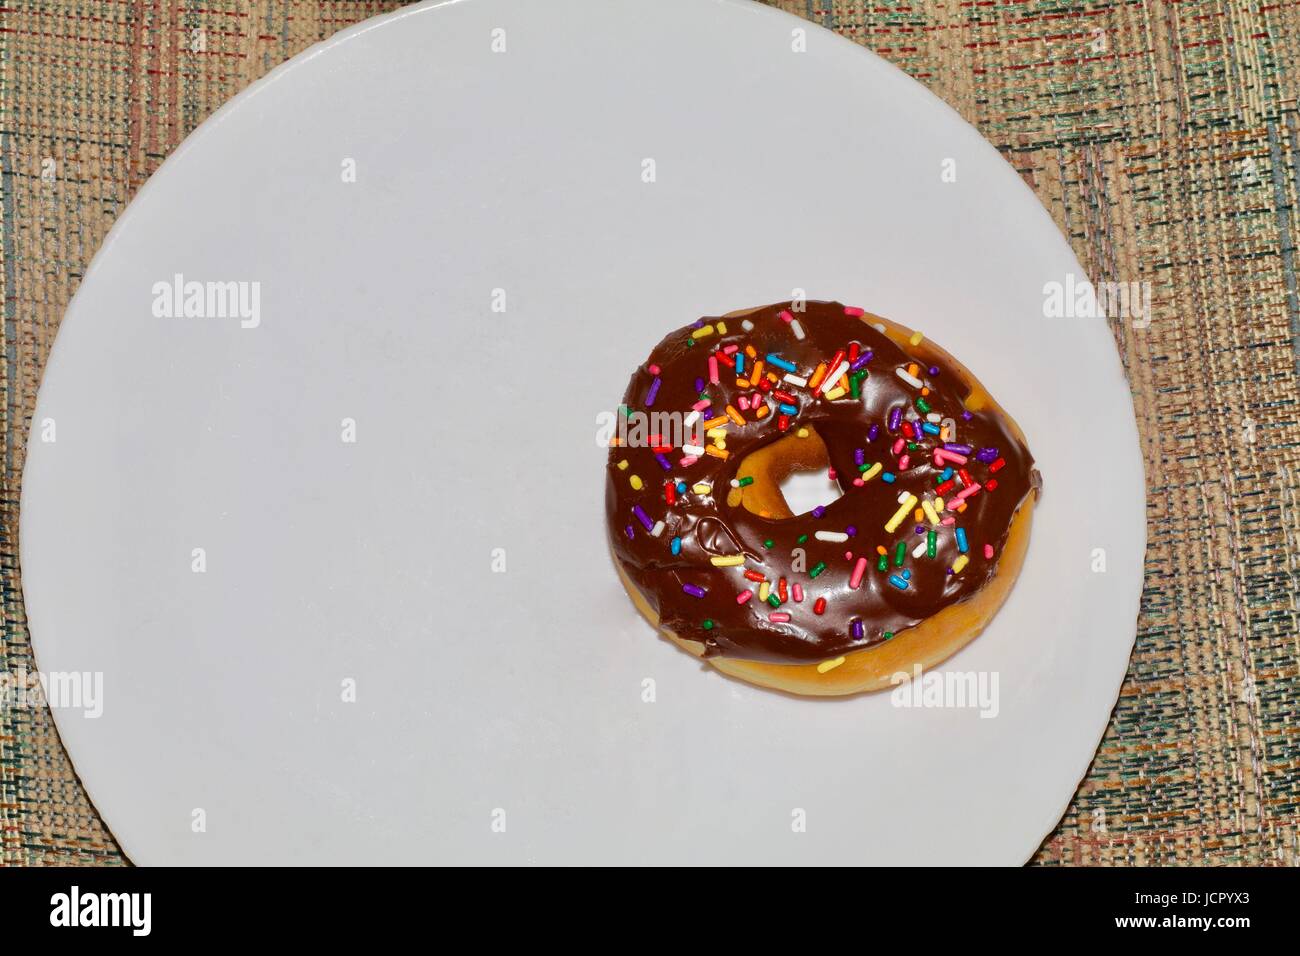 Single chocolate covered doughnut with sprinkles Stock Photo